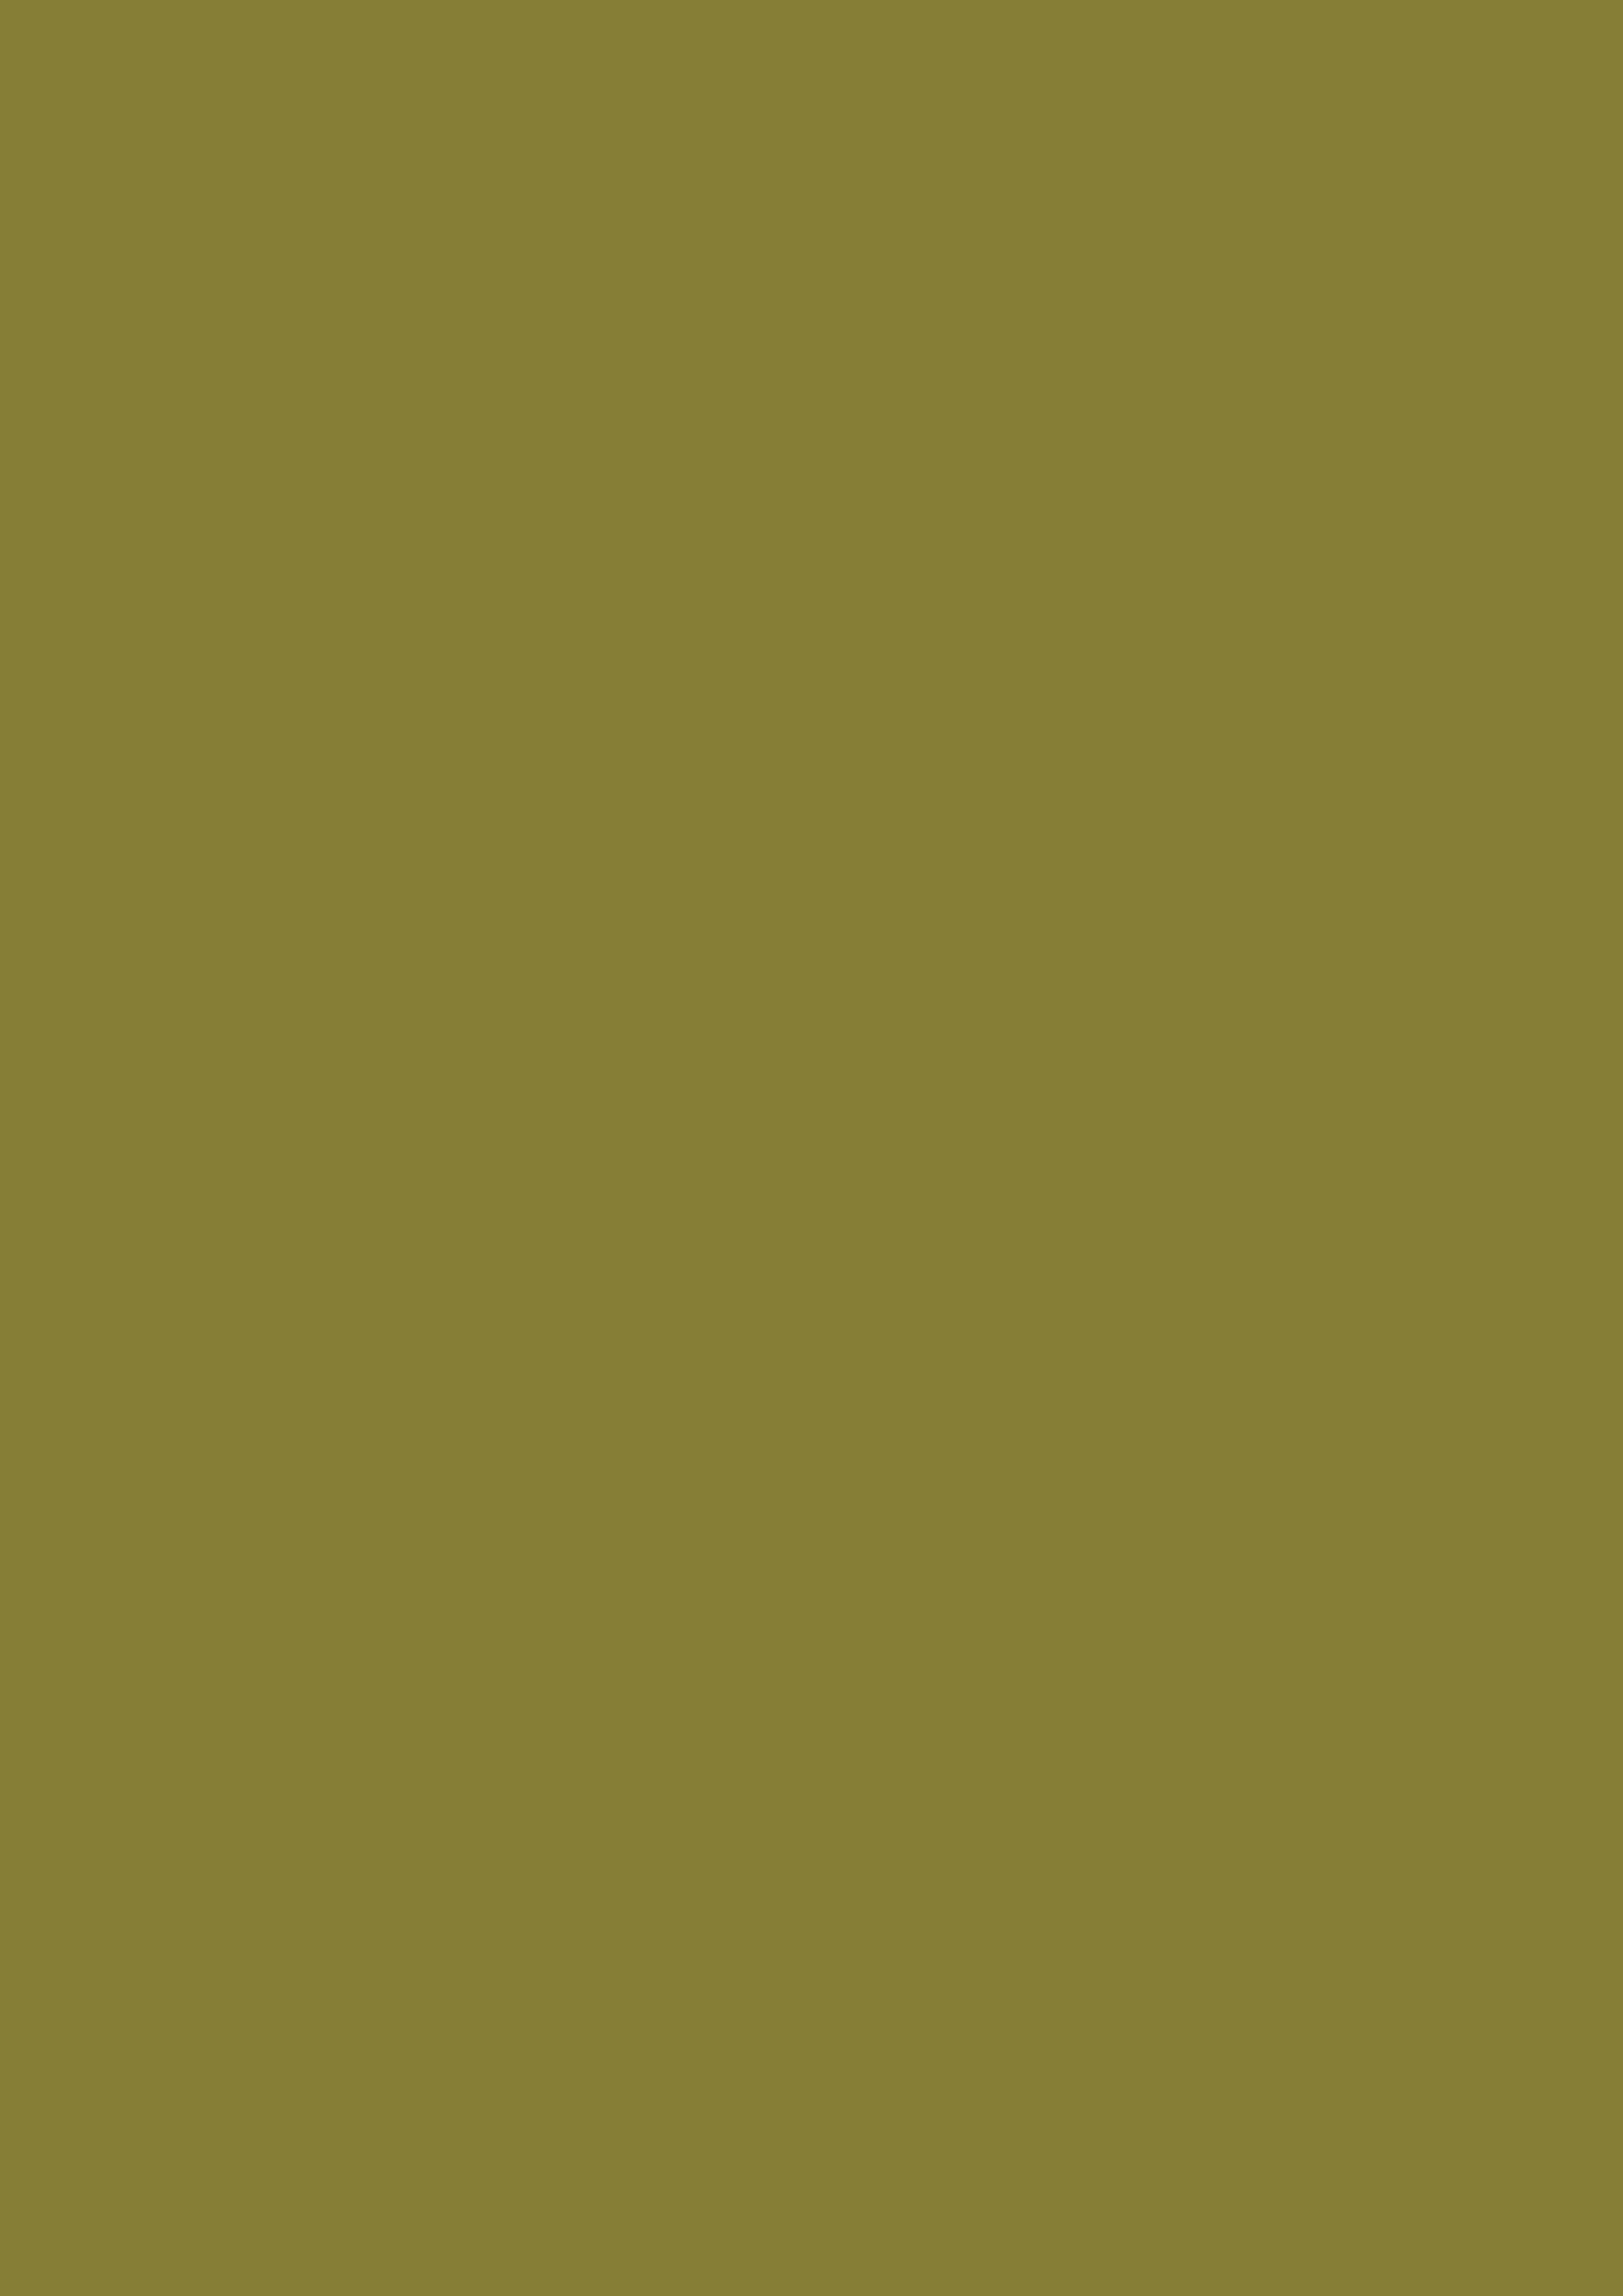 2480x3508 Old Moss Green Solid Color Background